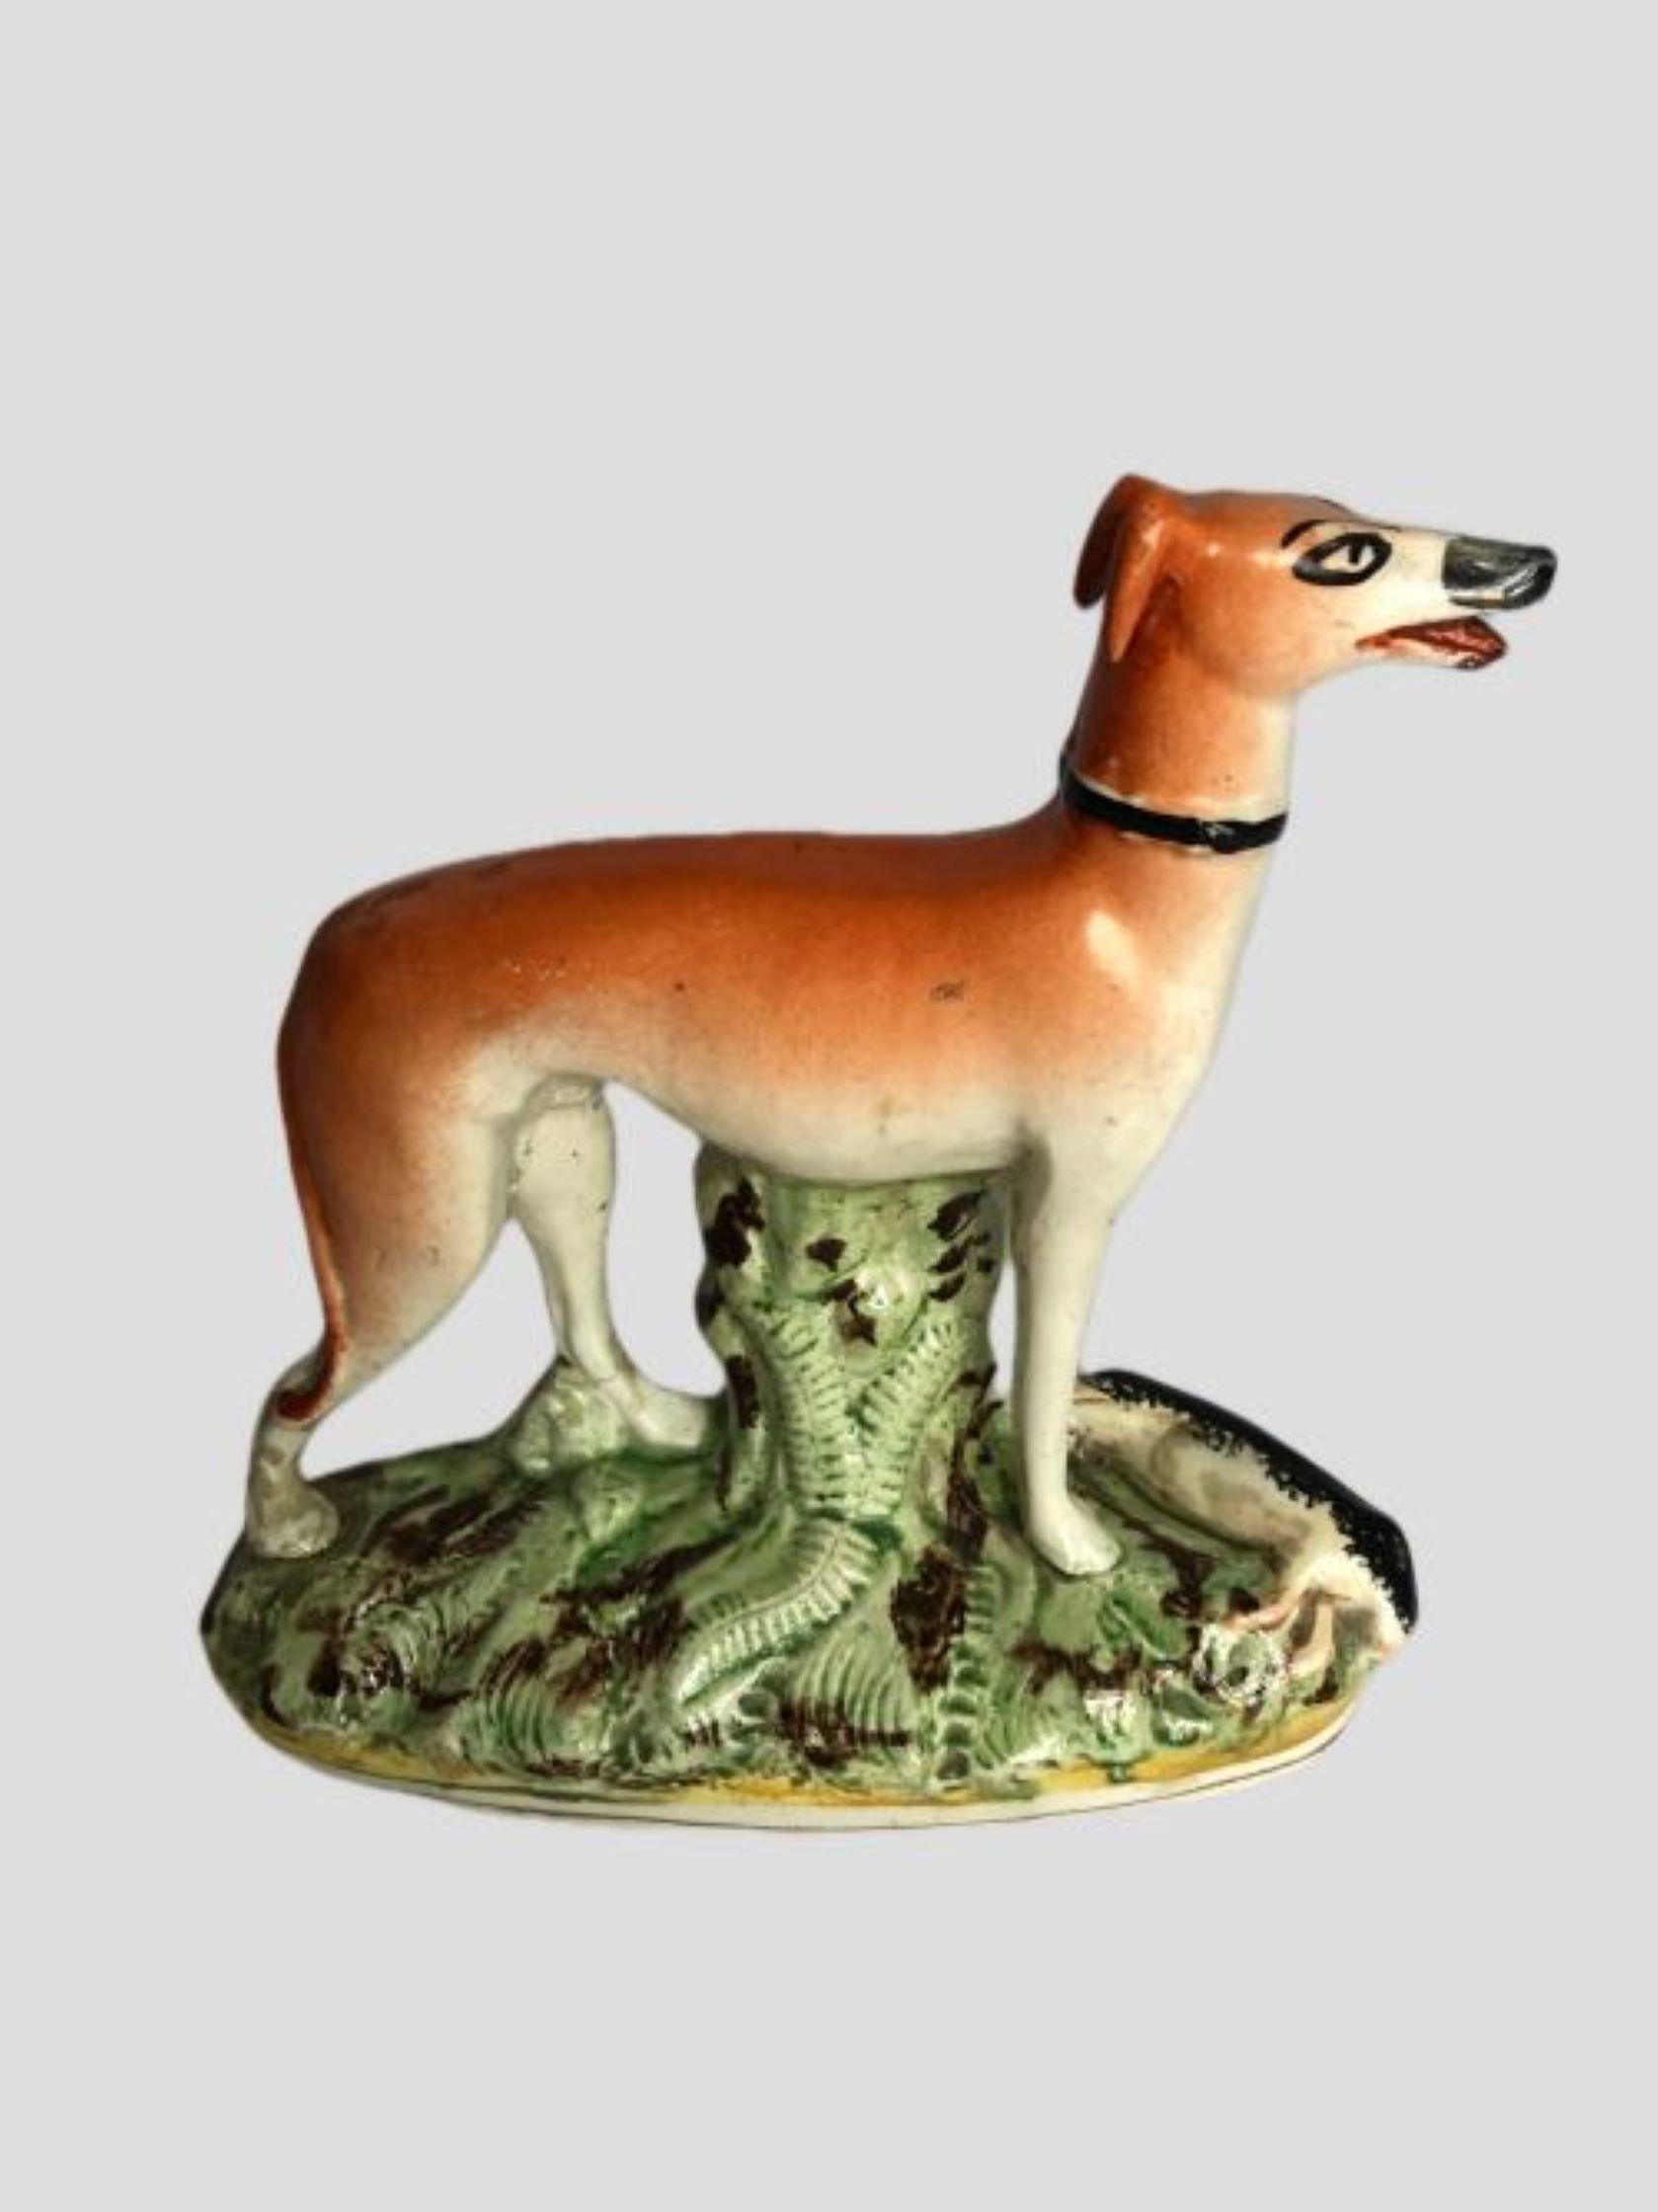 Antique Victorian Staffordshire figure of a greyhound dog. Wonderful Brown and White figure of a greyhound standing on a oval base with Green leaves.